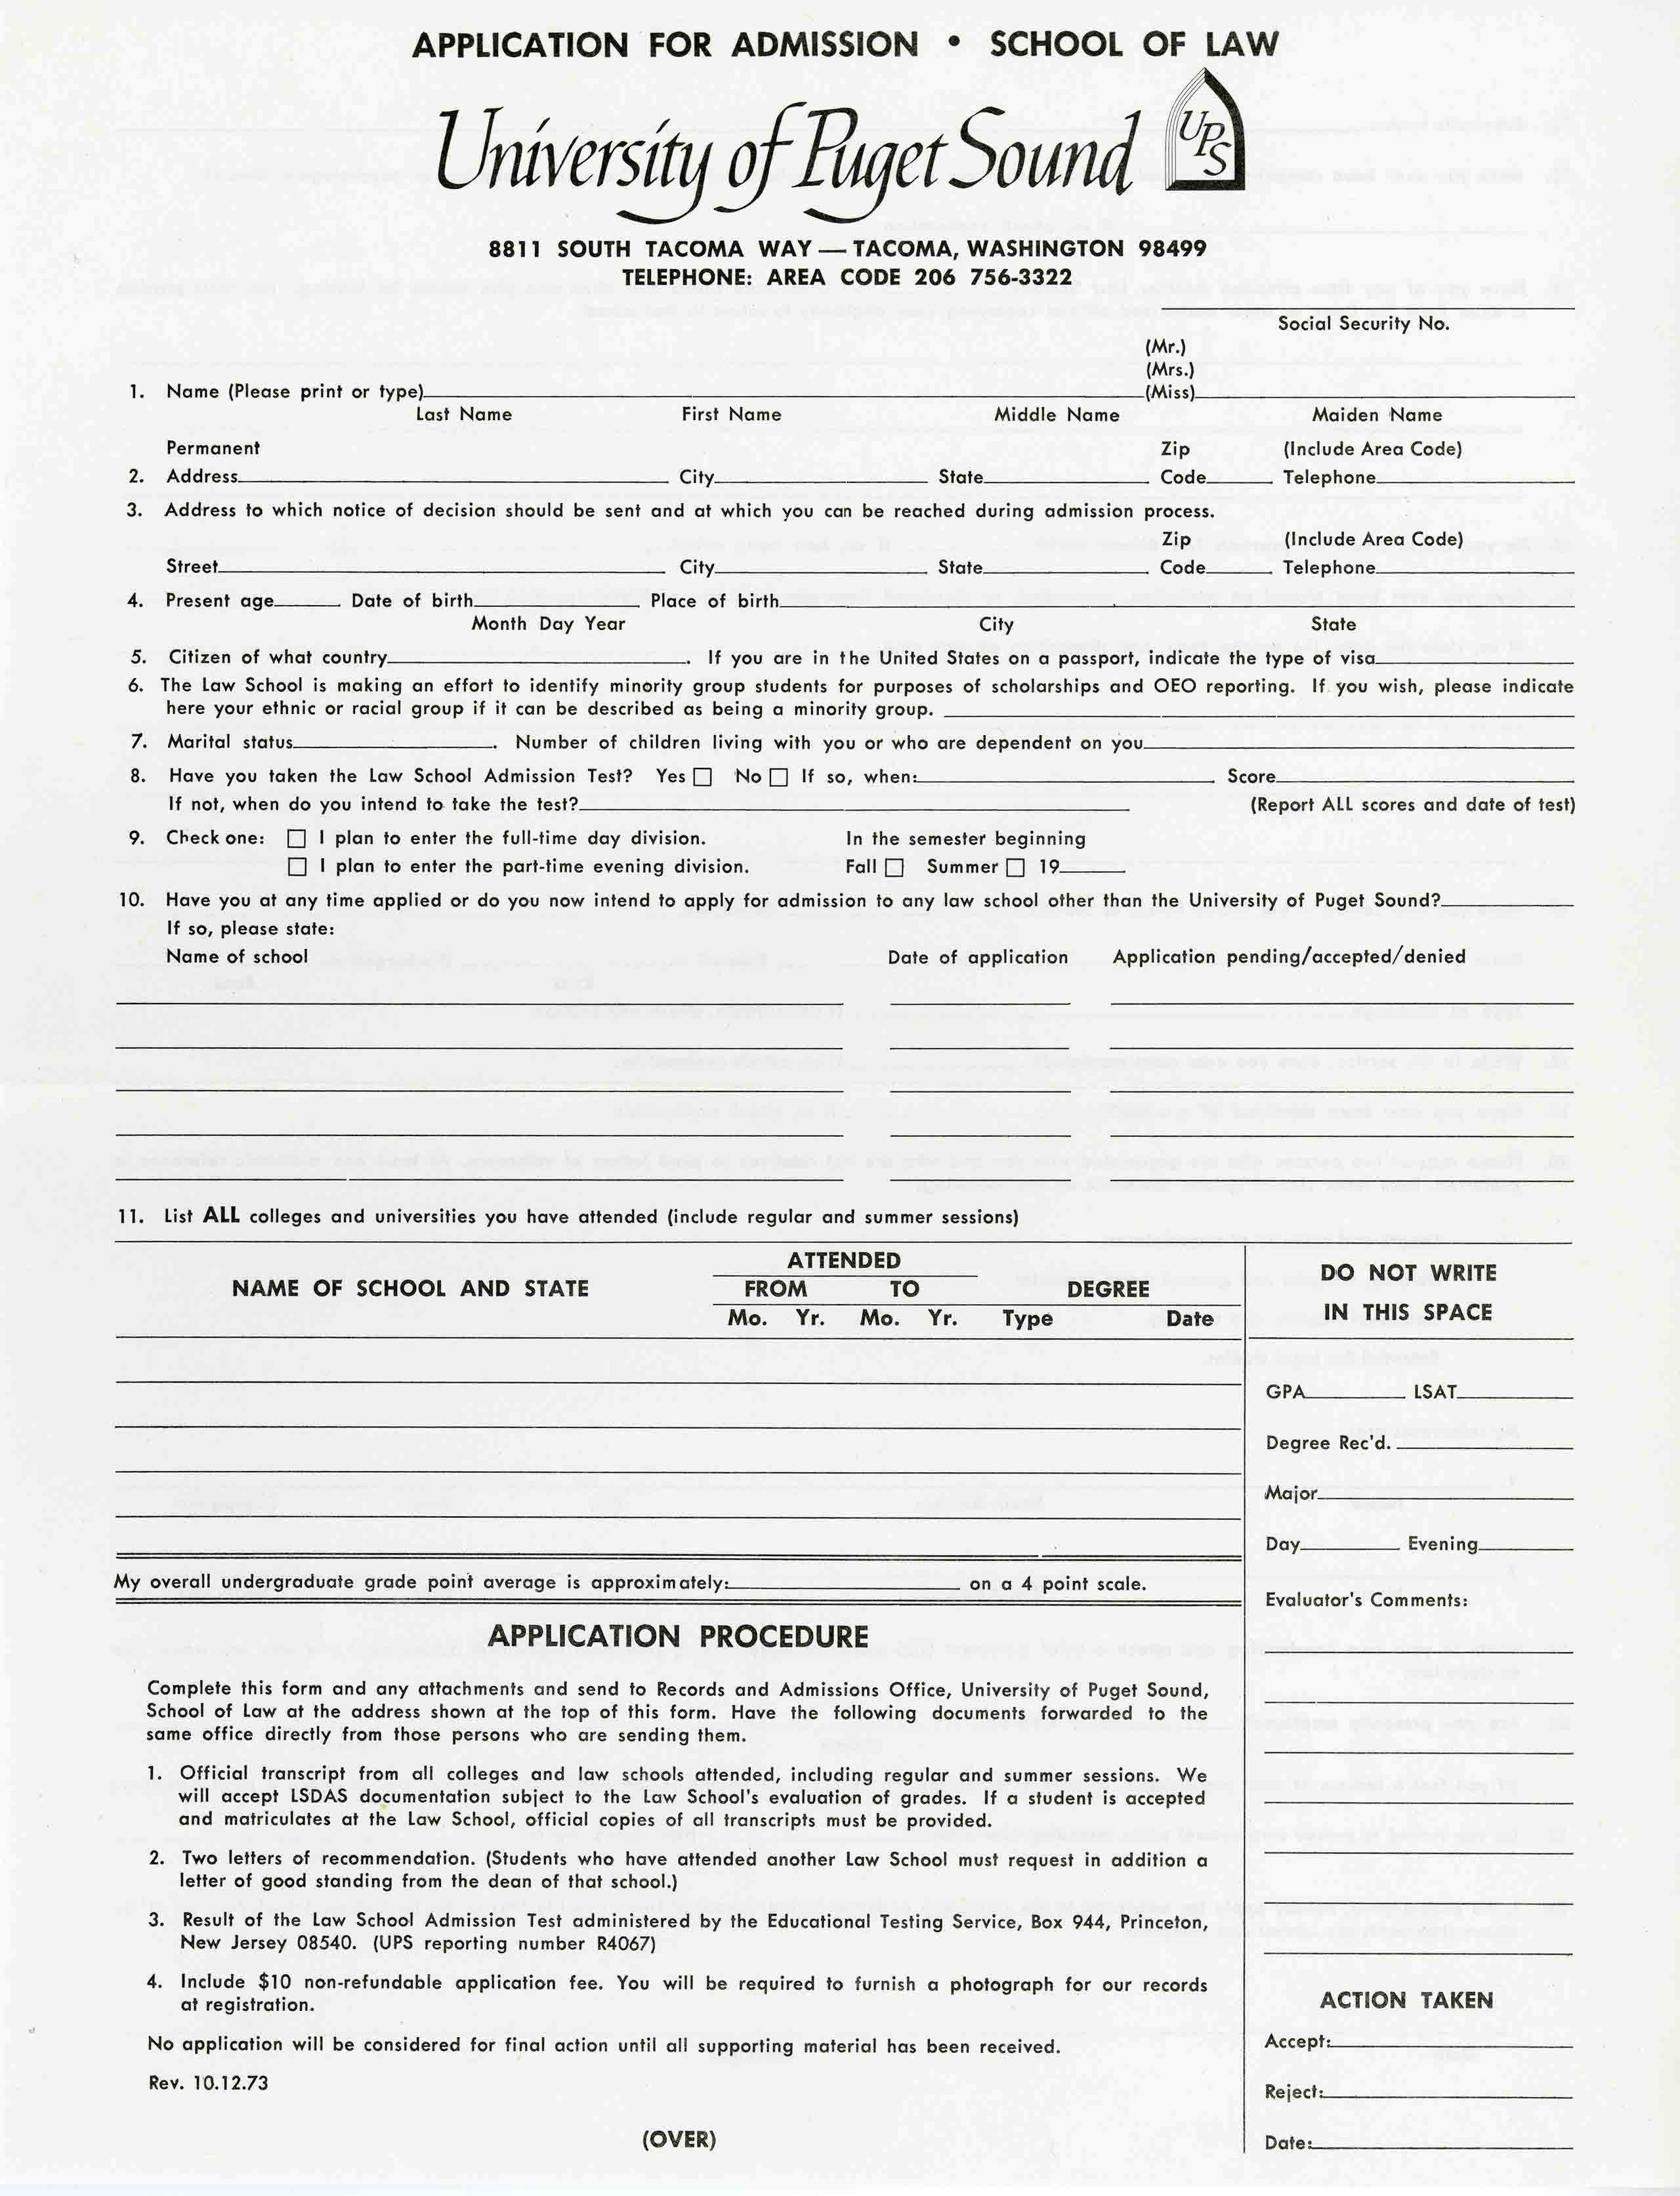 University of Puget Sound Law application (1974-75)